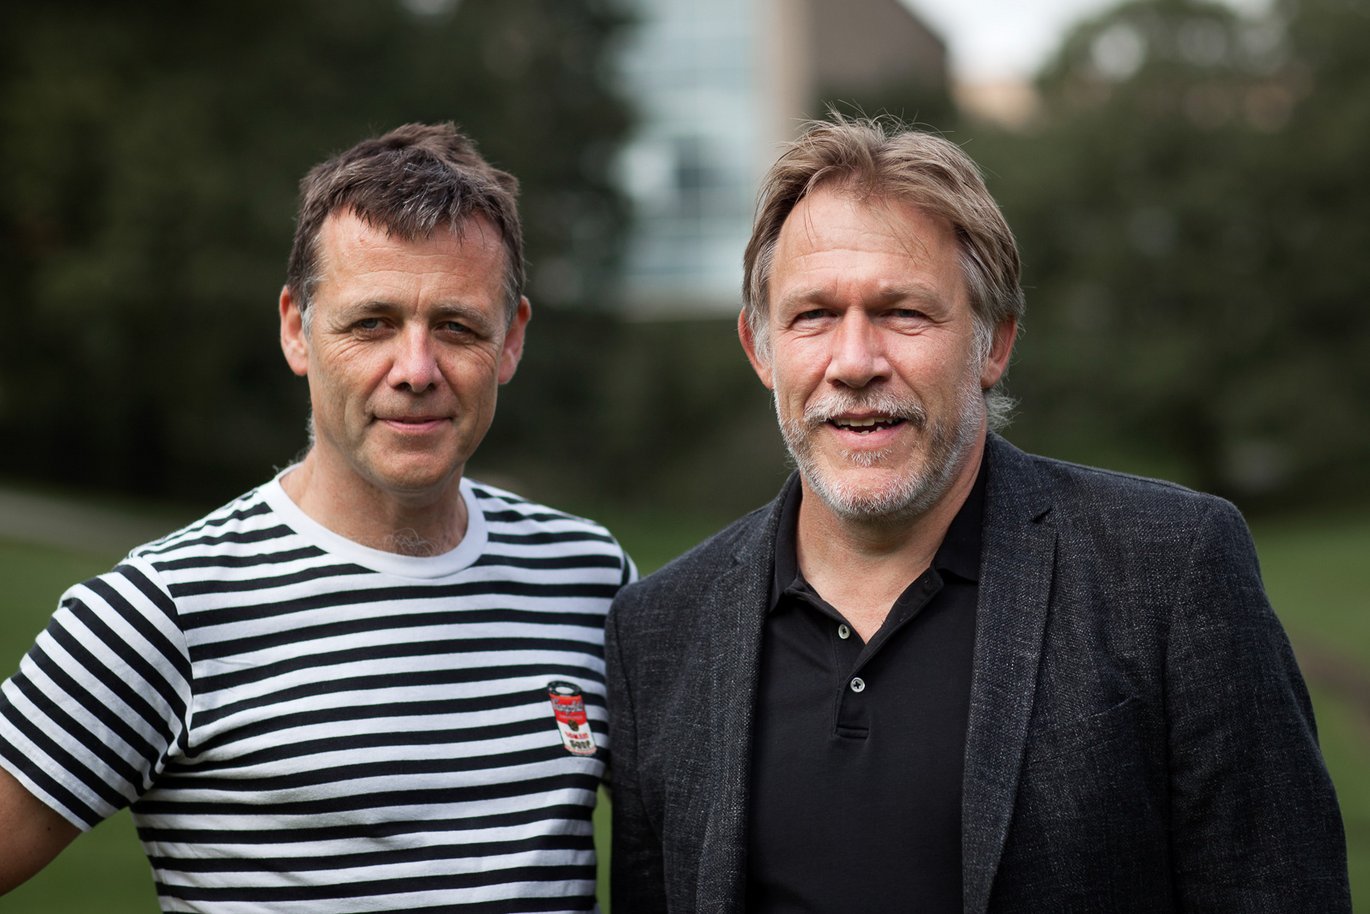 The main organisers behind the CoronaLytics project are Carsten Obel (left) together with Kaj Grønbæk, who is professor and department head at the Department of Computer Science. Photo: Mellissa Bach Kirkeby Yildirim/AU.